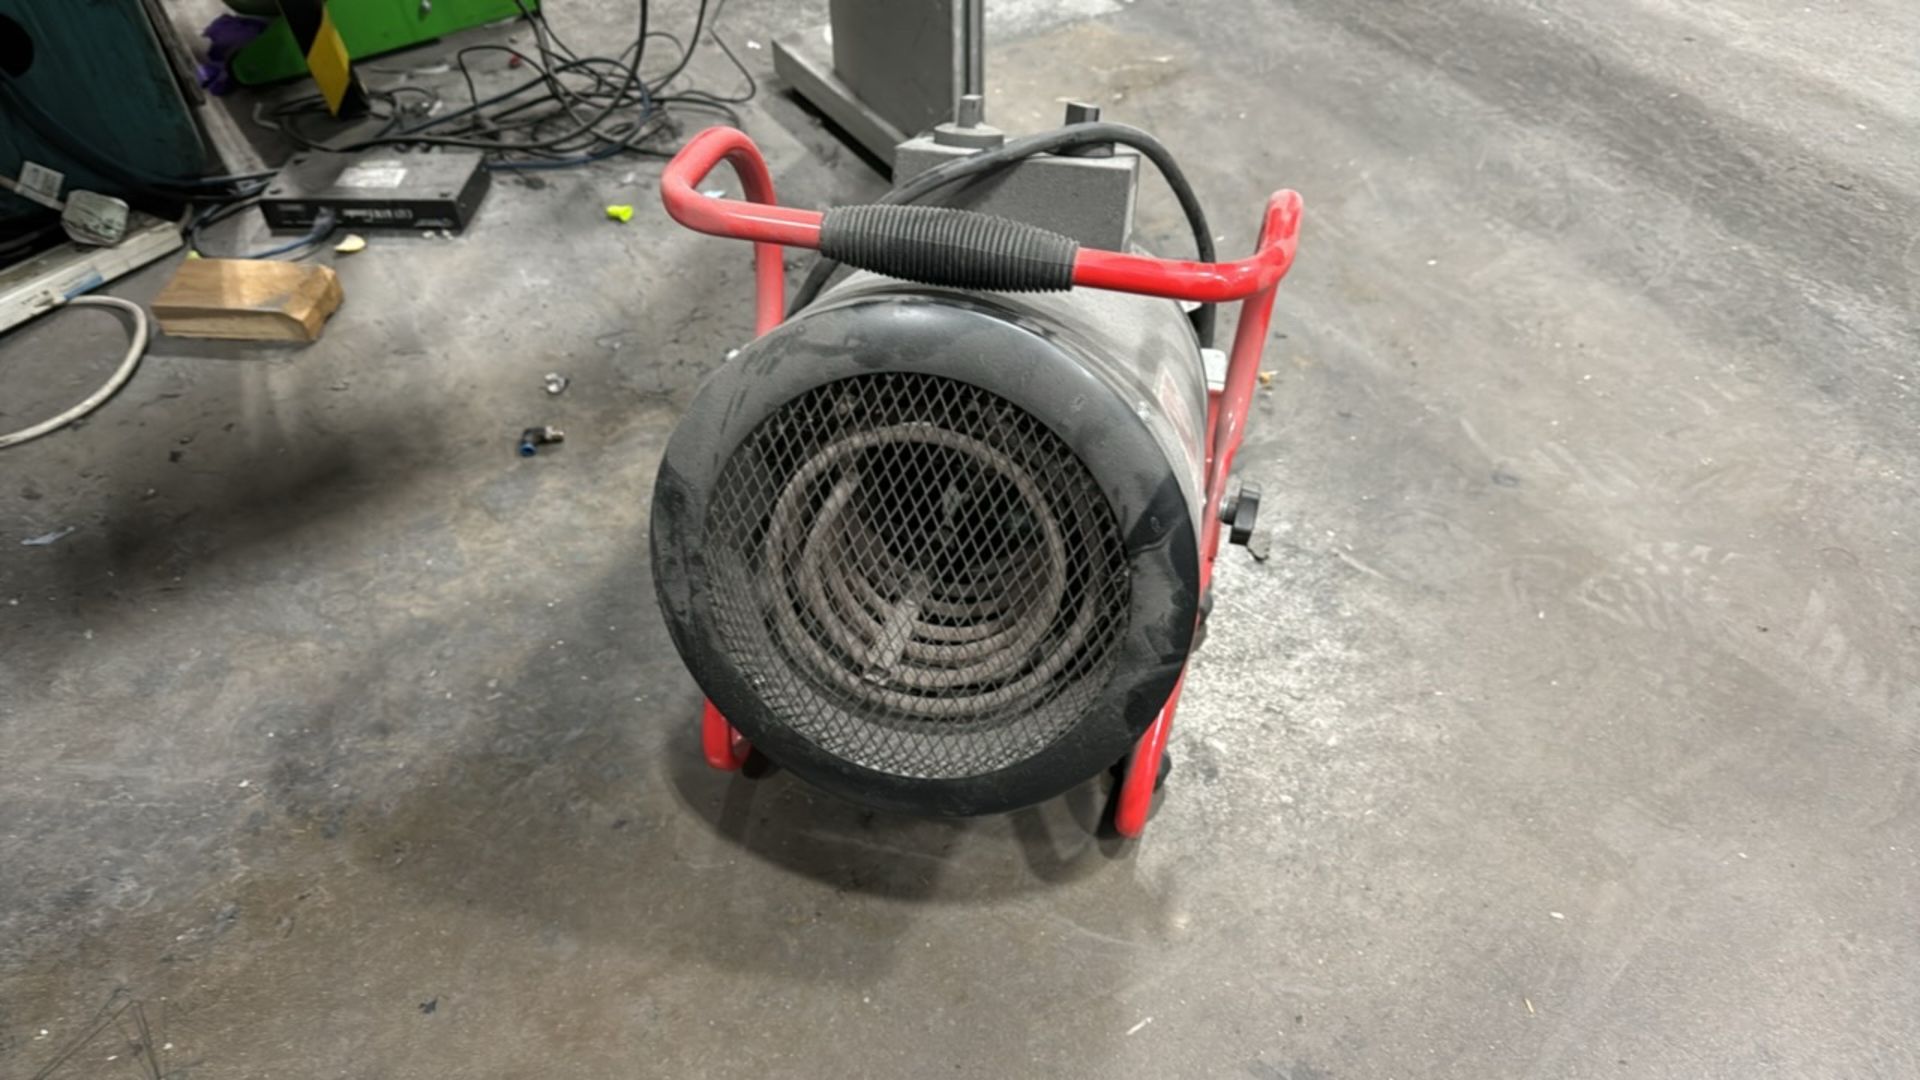 ref 595 - RS Pro Portable Heater